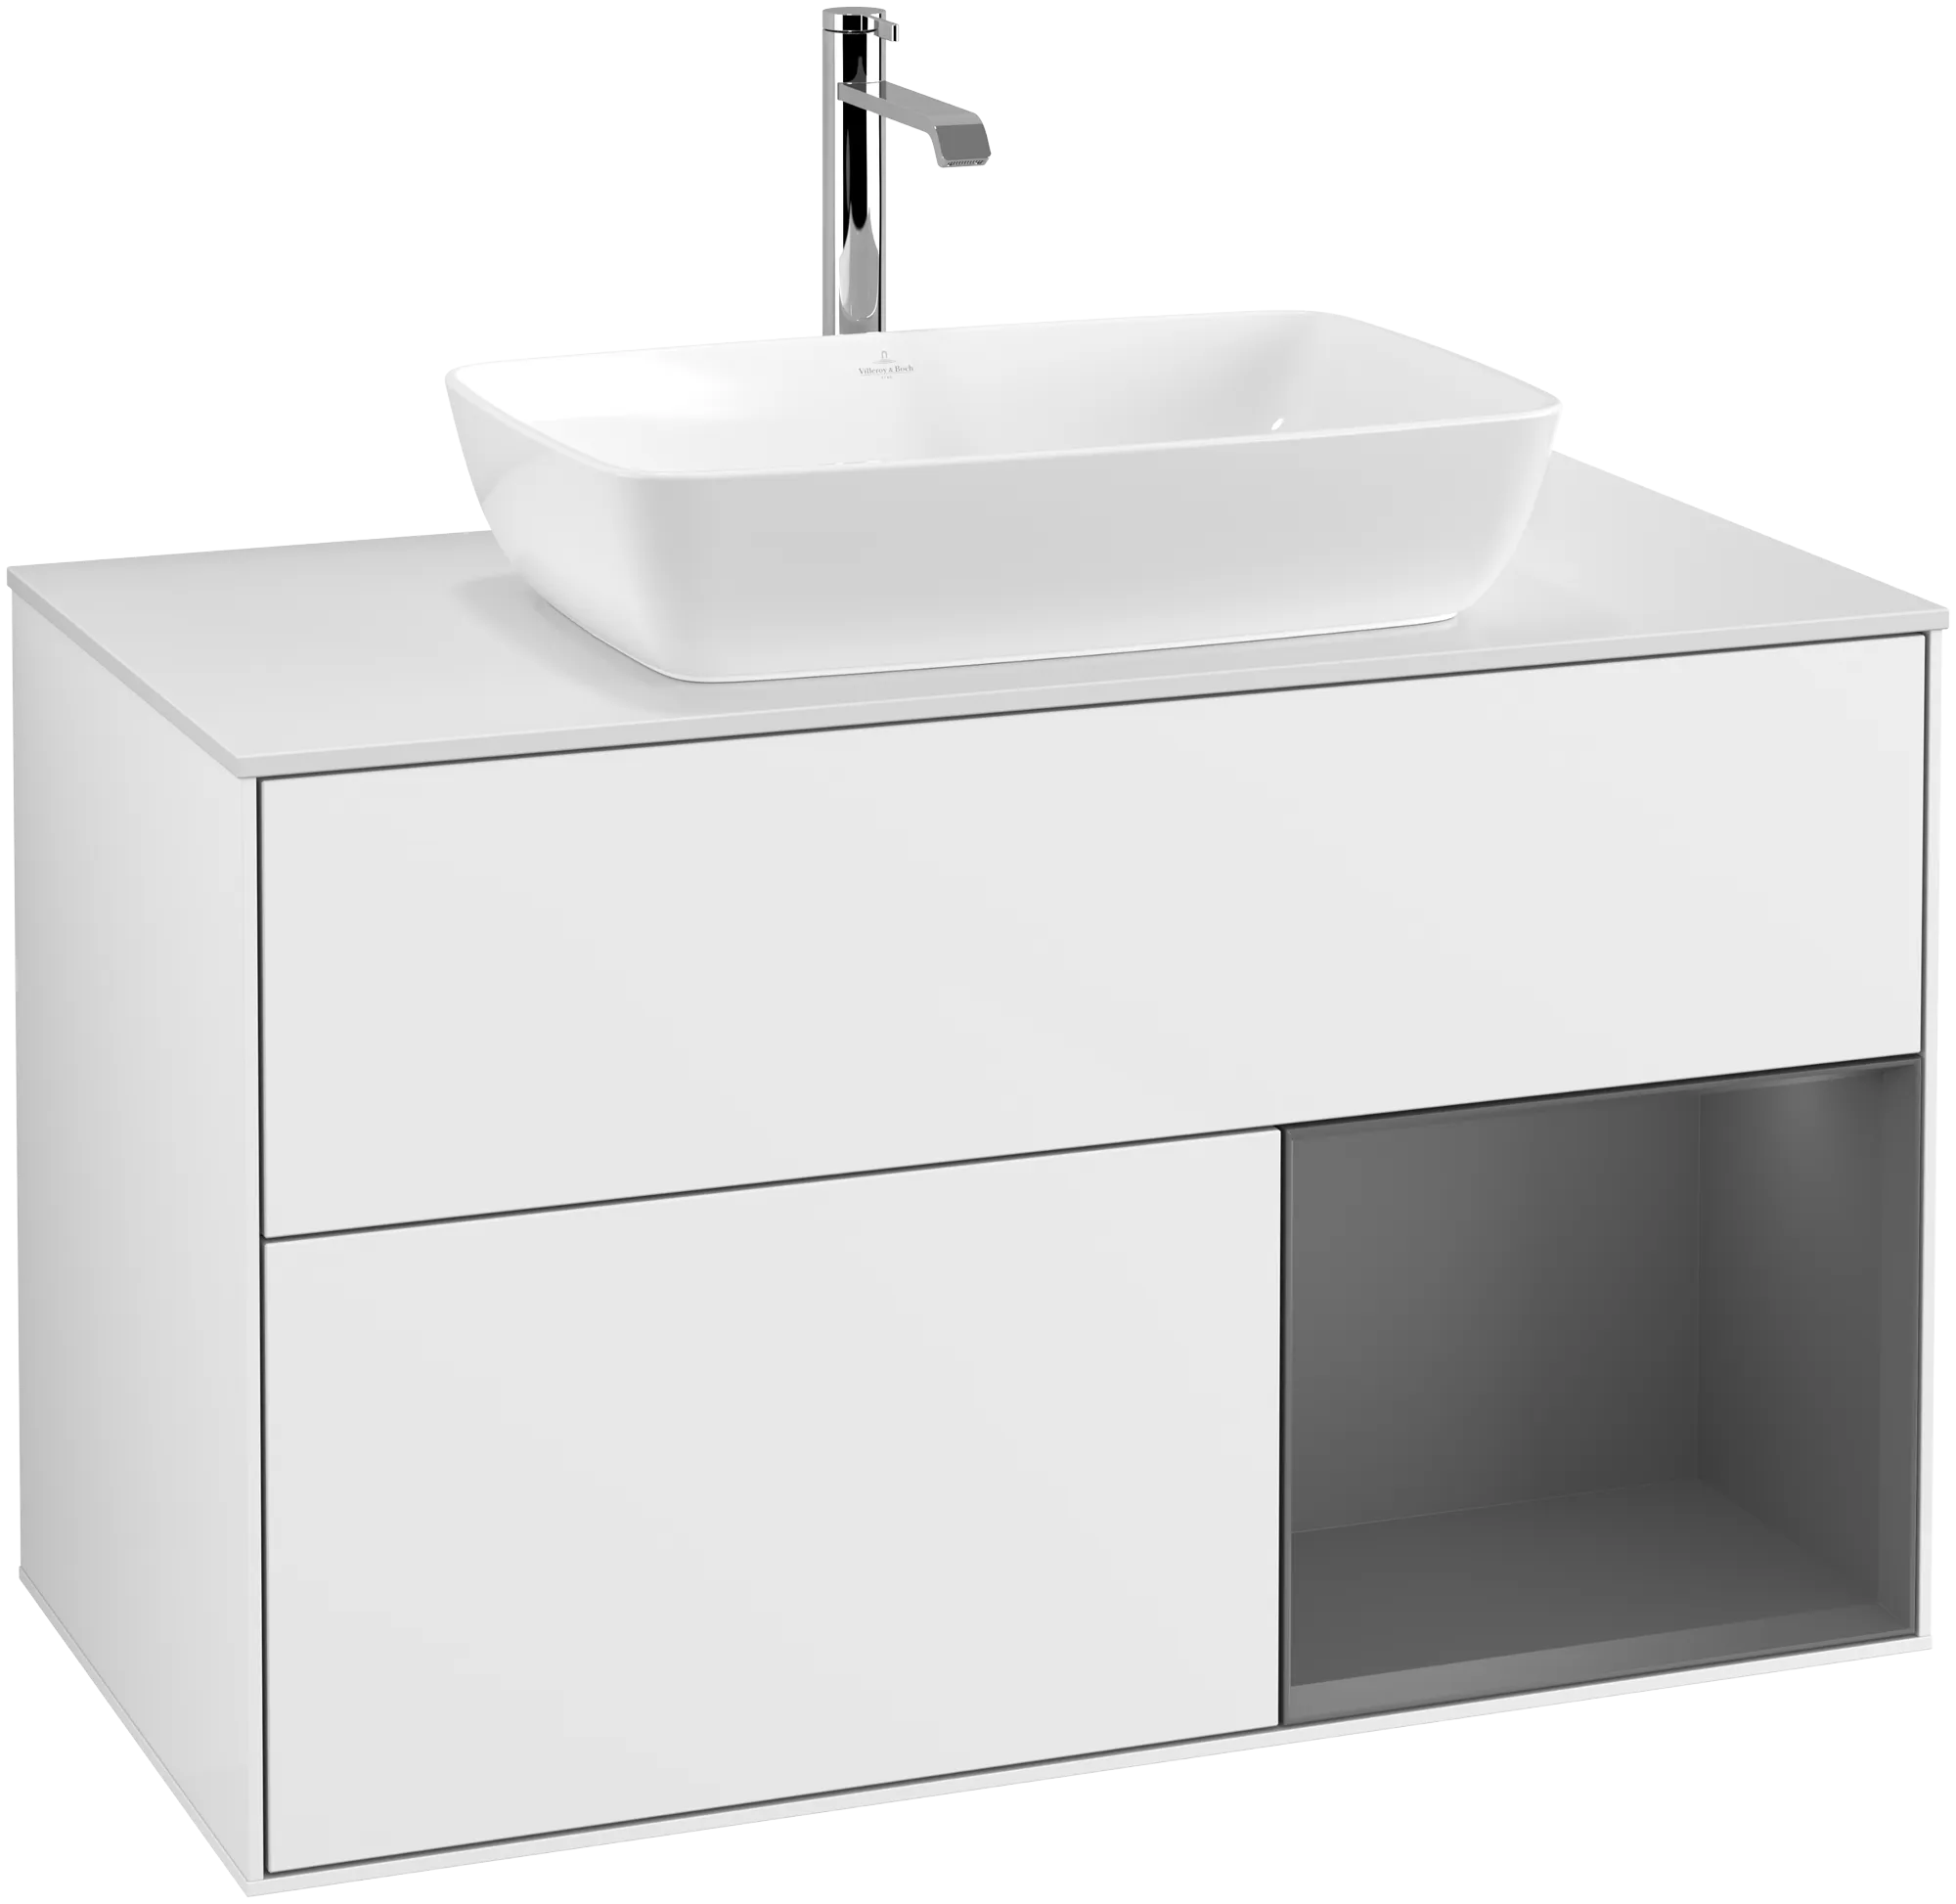 Picture of VILLEROY BOCH Finion Vanity unit, with lighting, 2 pull-out compartments, 1000 x 603 x 501 mm, Glossy White Lacquer / Anthracite Matt Lacquer / Glass White Matt #G781GKGF